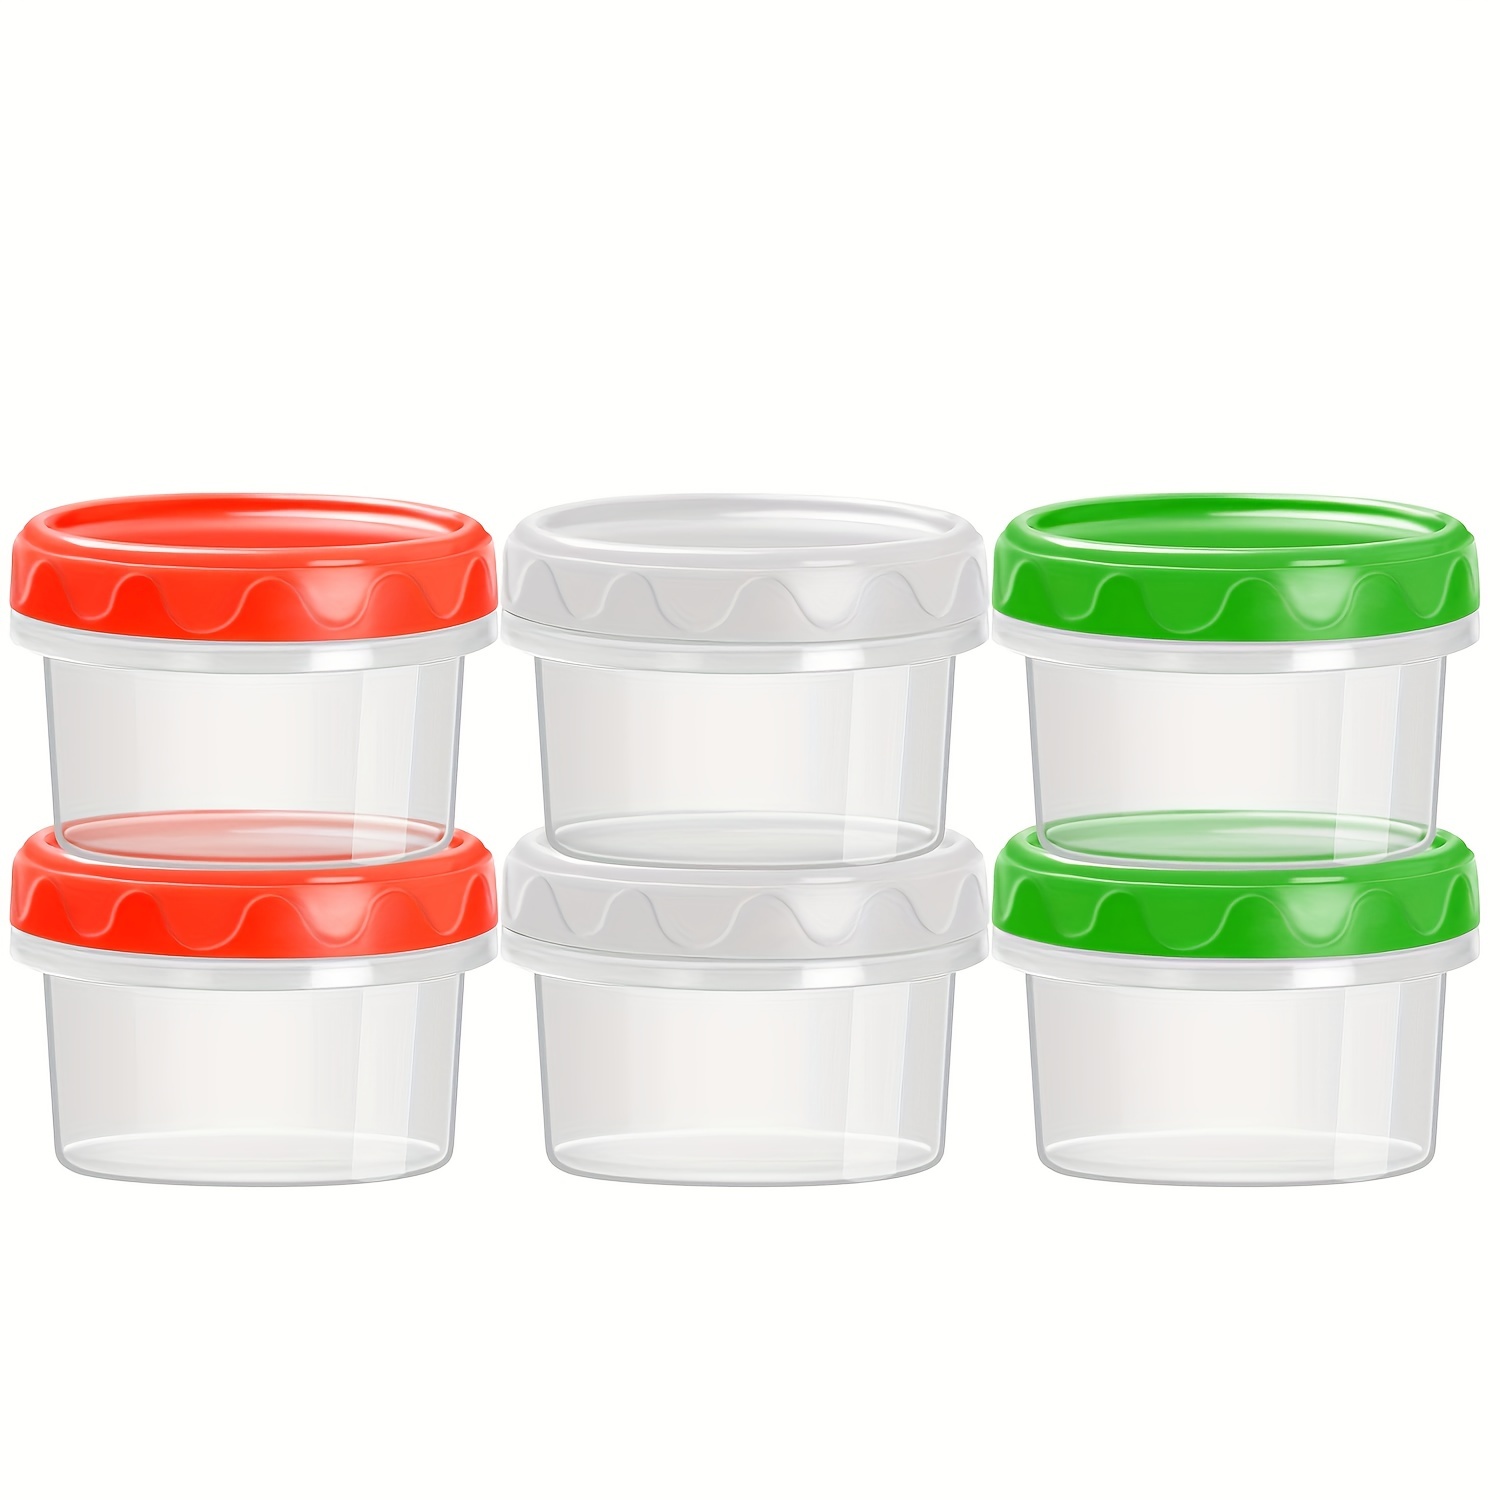 2PCS Dip Containers, Only Fits for Which is Redesigned, 4oz Silicone Salad  Dressing Container Dipping Sauce Container Dipping Sauce Cups with Lids for